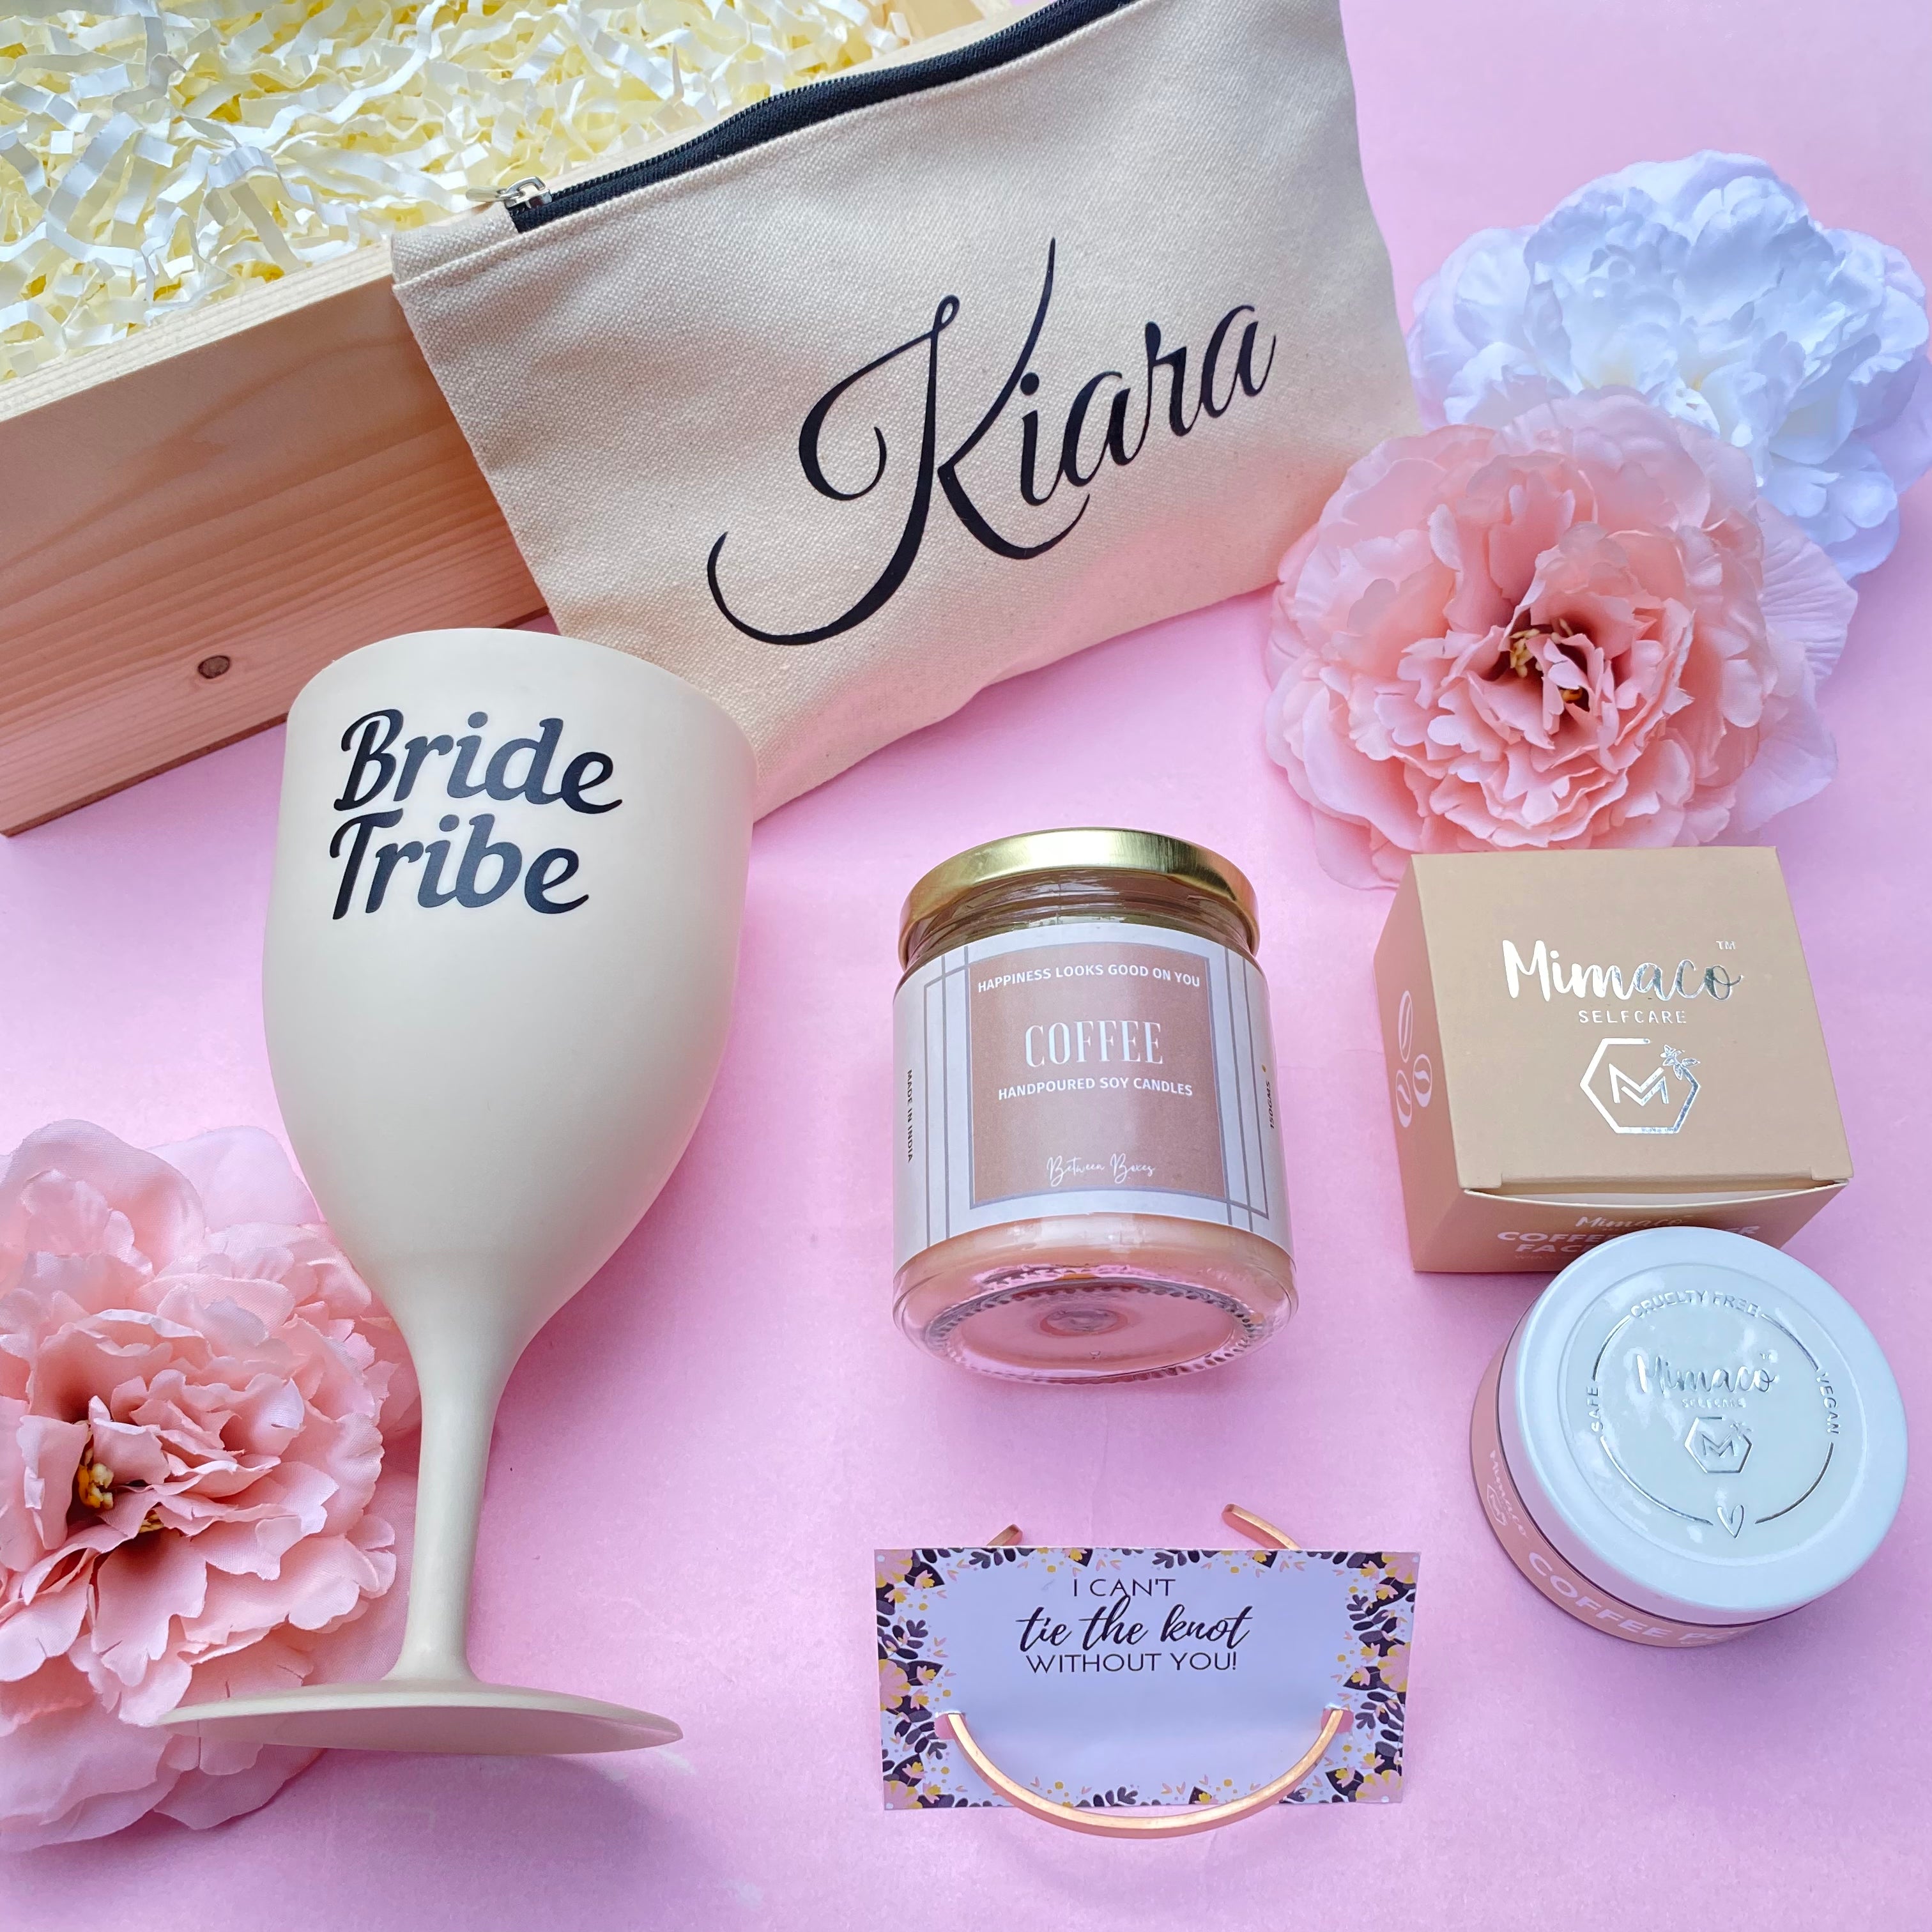 Build a Bridesmaid Gift Box options include Robe, Tumbler, Jewelry -  Bridesmaid Gifts Boutique